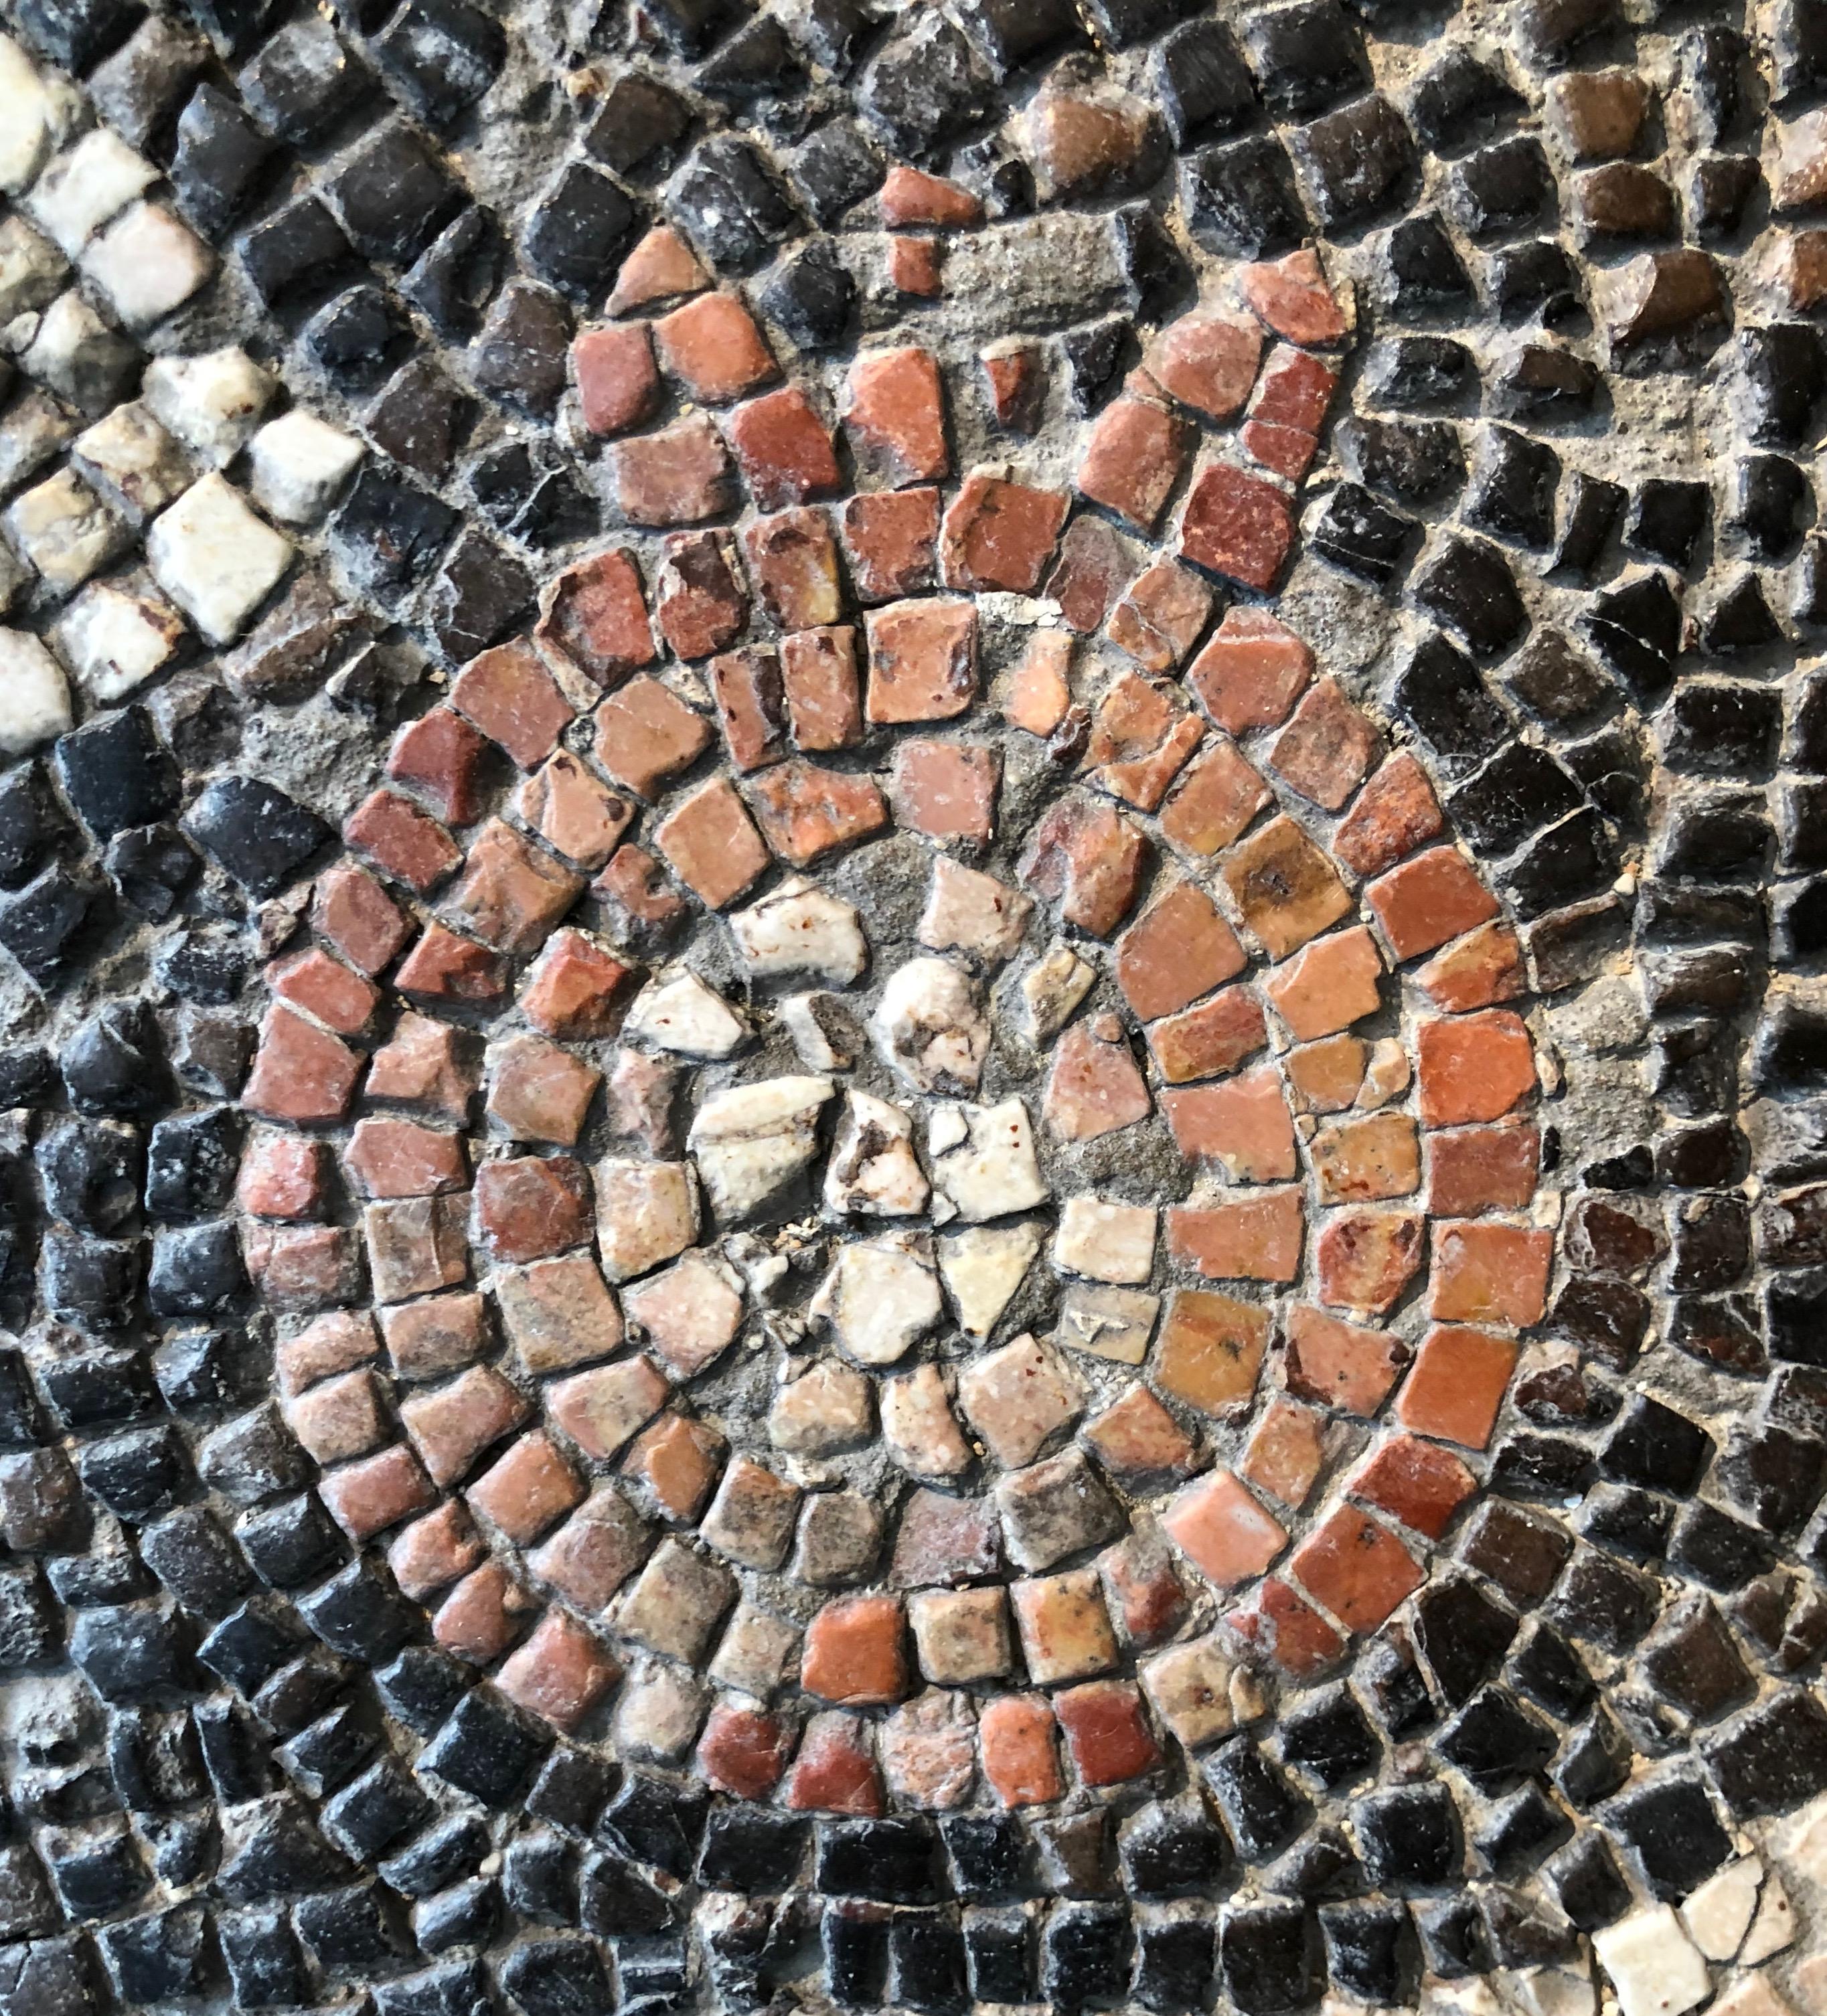 This late Roman circa 4th-5th century AD mosaic fragment designed with a pomegranate in the center, otherwise with an undefined motive making it look very abstract, is a work of art by itself. It is made of small stones or marble squares of